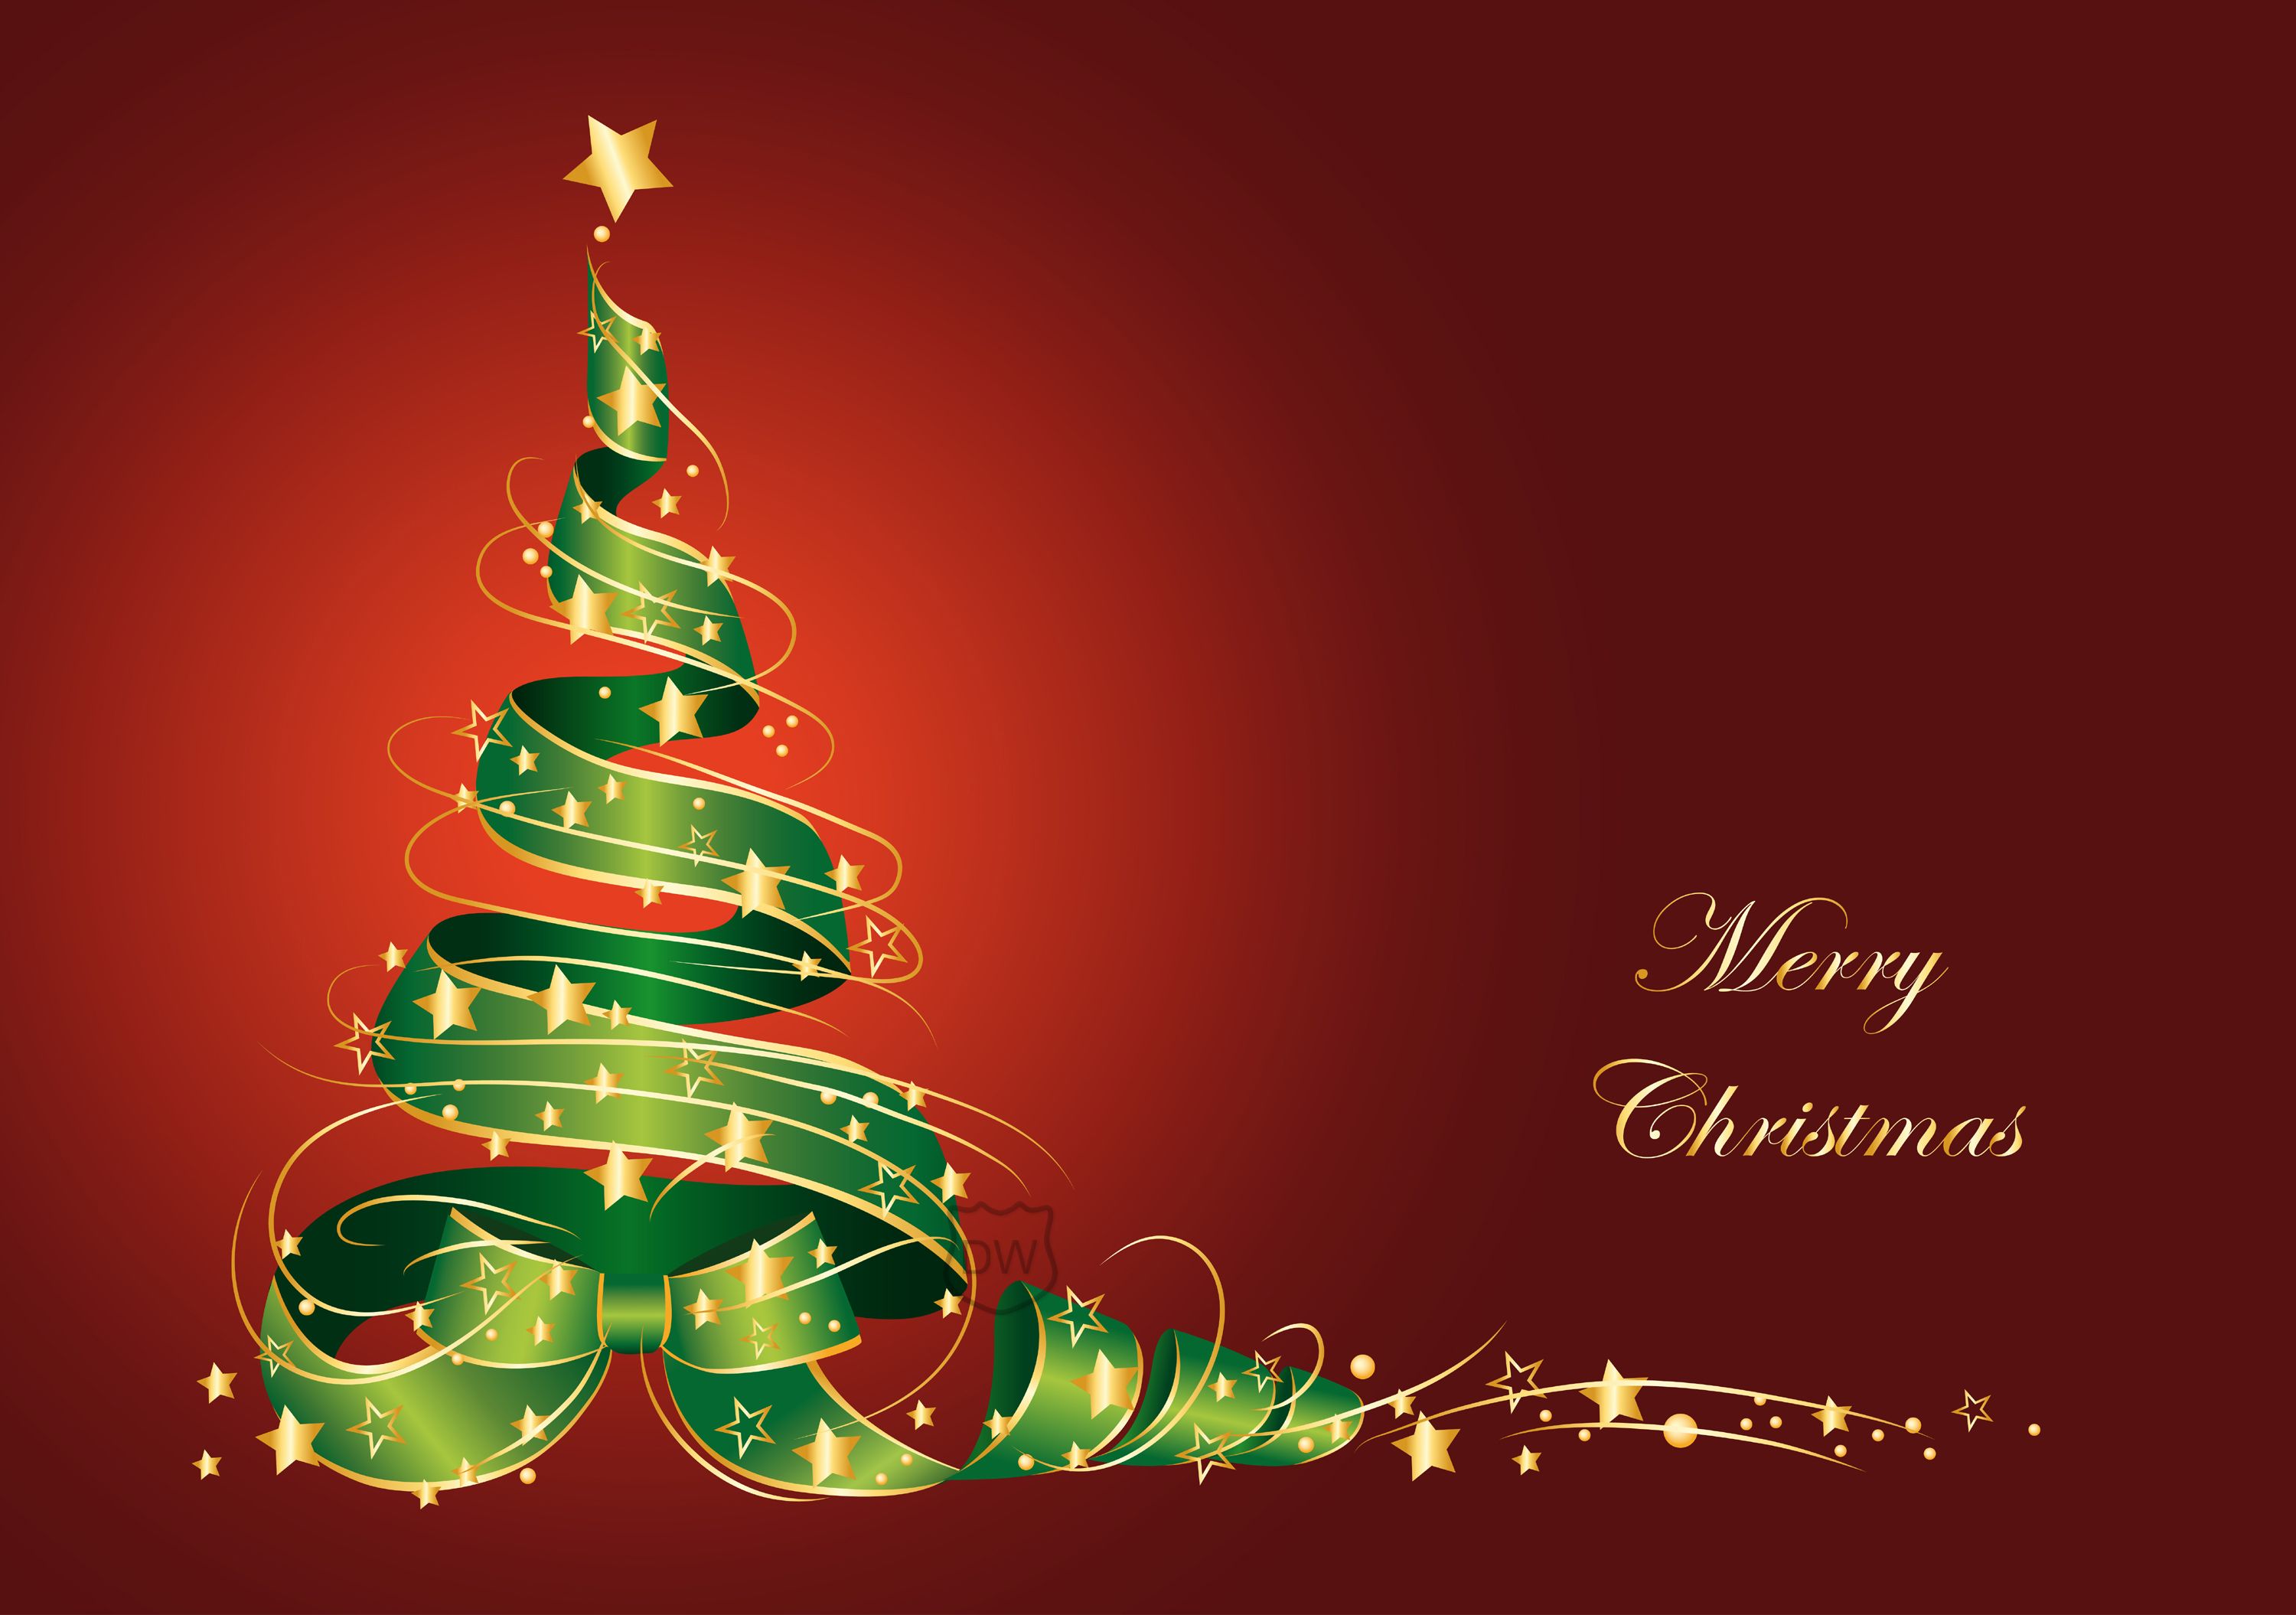 Full HD Merry Christmas Wallpapers Full HD Pictures